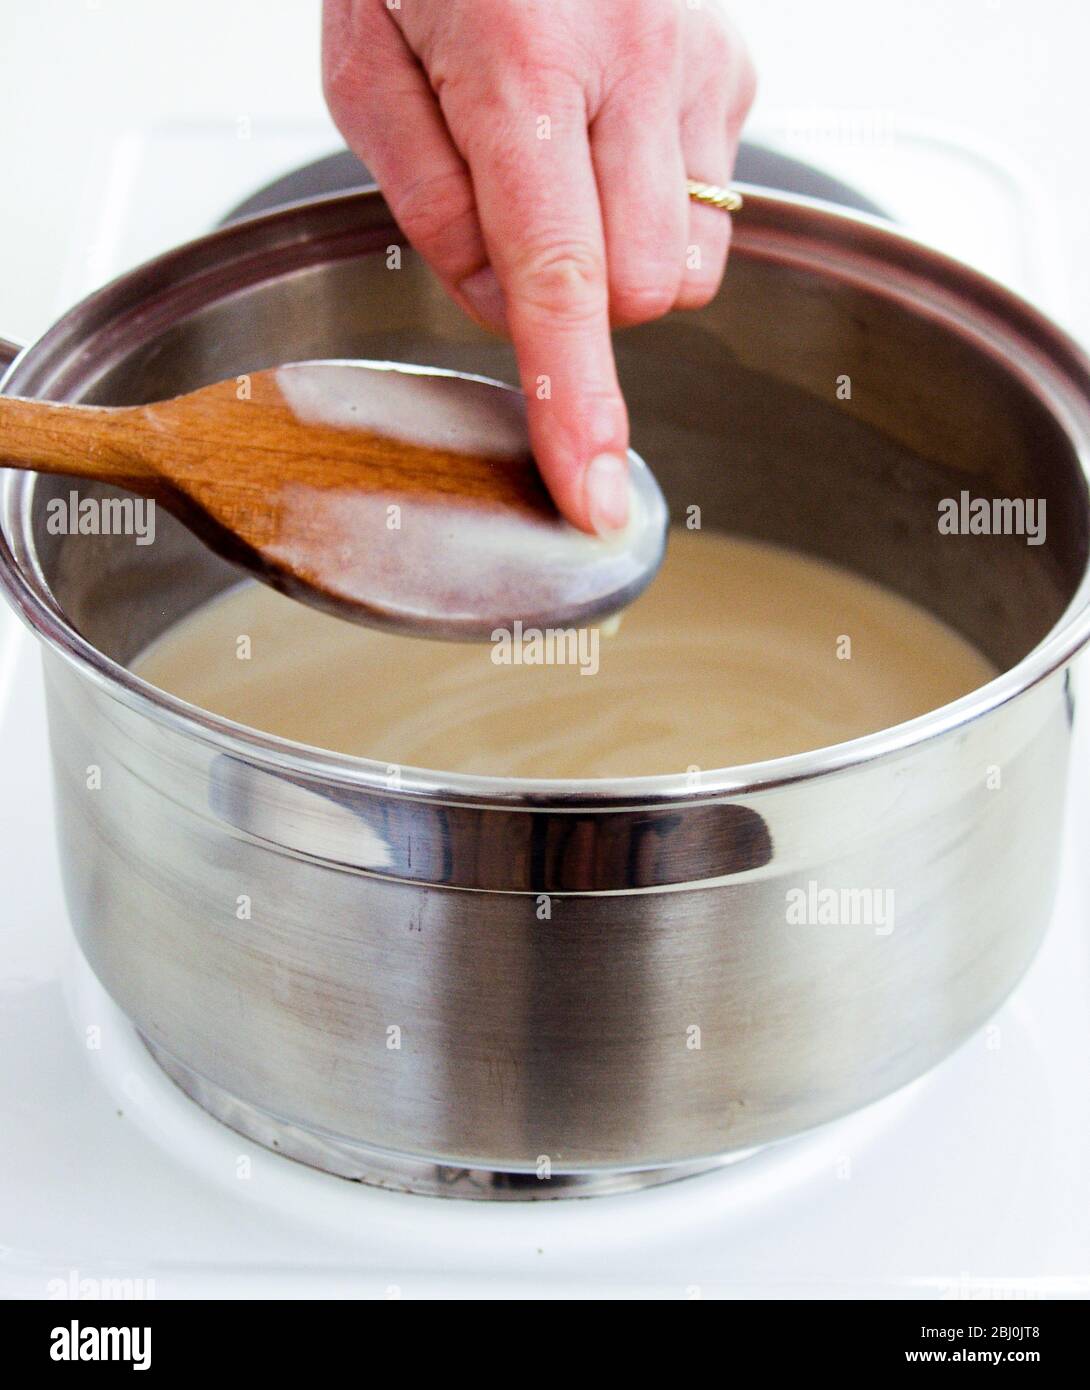 Checking thickness of a custard by seeing how well it coats the back of a spoon - Stock Photo